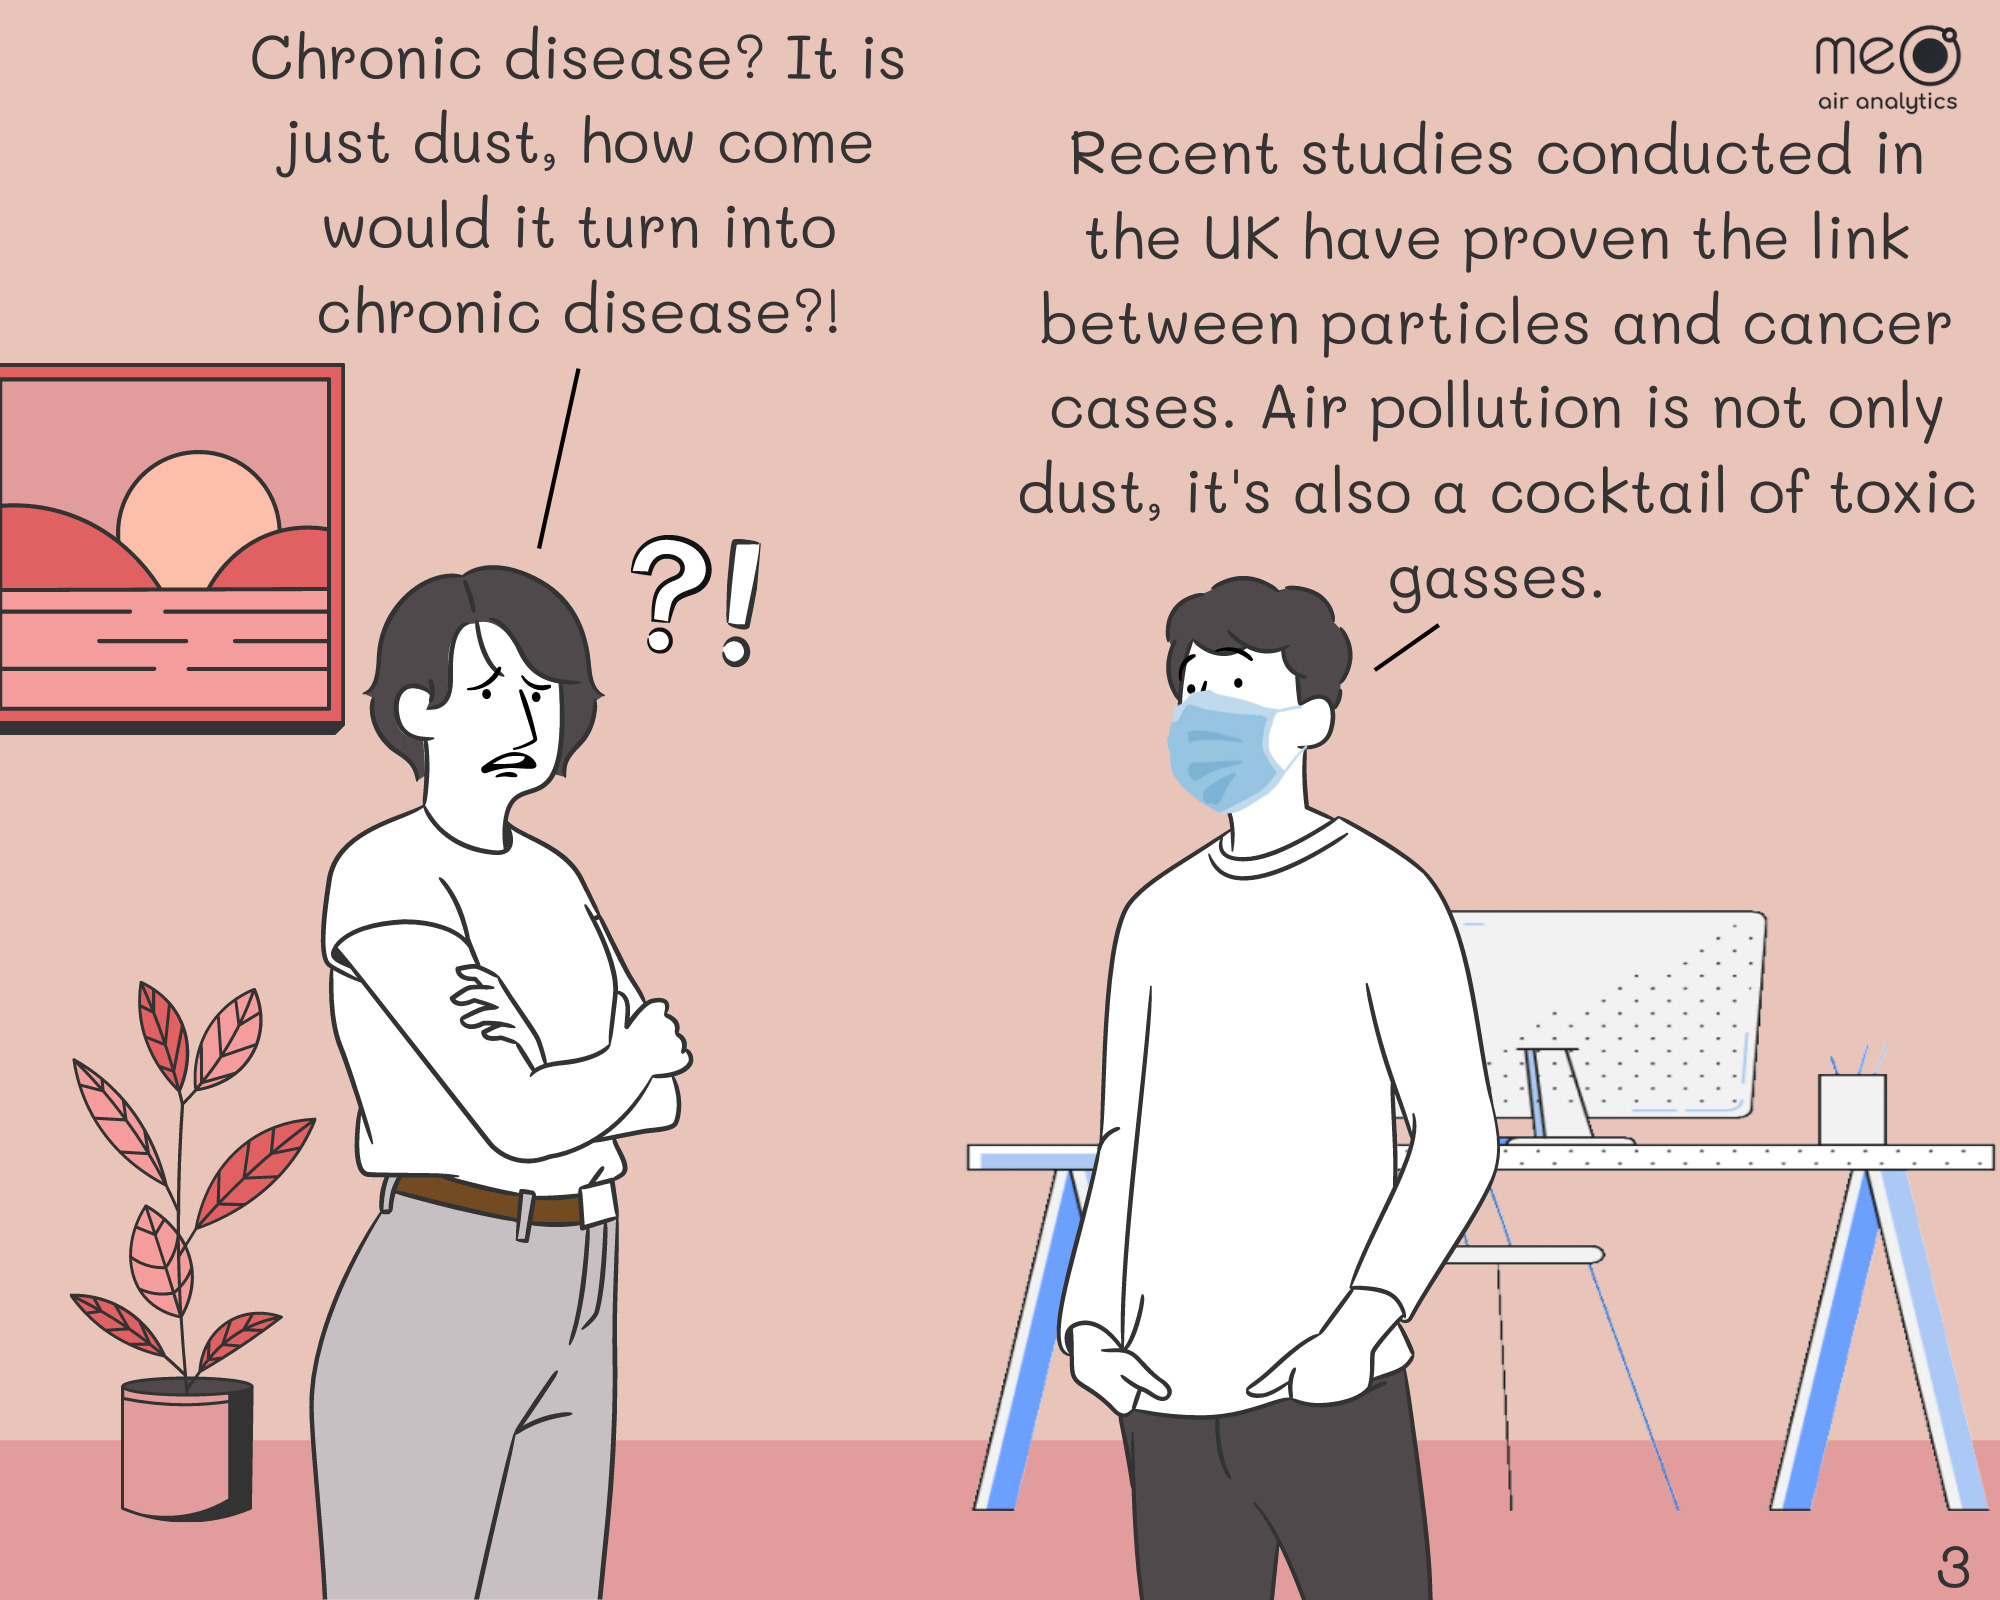 Joyce: Chronic disease? It is just dust, how come would it turn into chronic disease?! Tim: Recent studies conducted in the UK have proven the link between particles and cancer cases. Air pollution is not only dust, it's also a cocktail of toxic gasses.